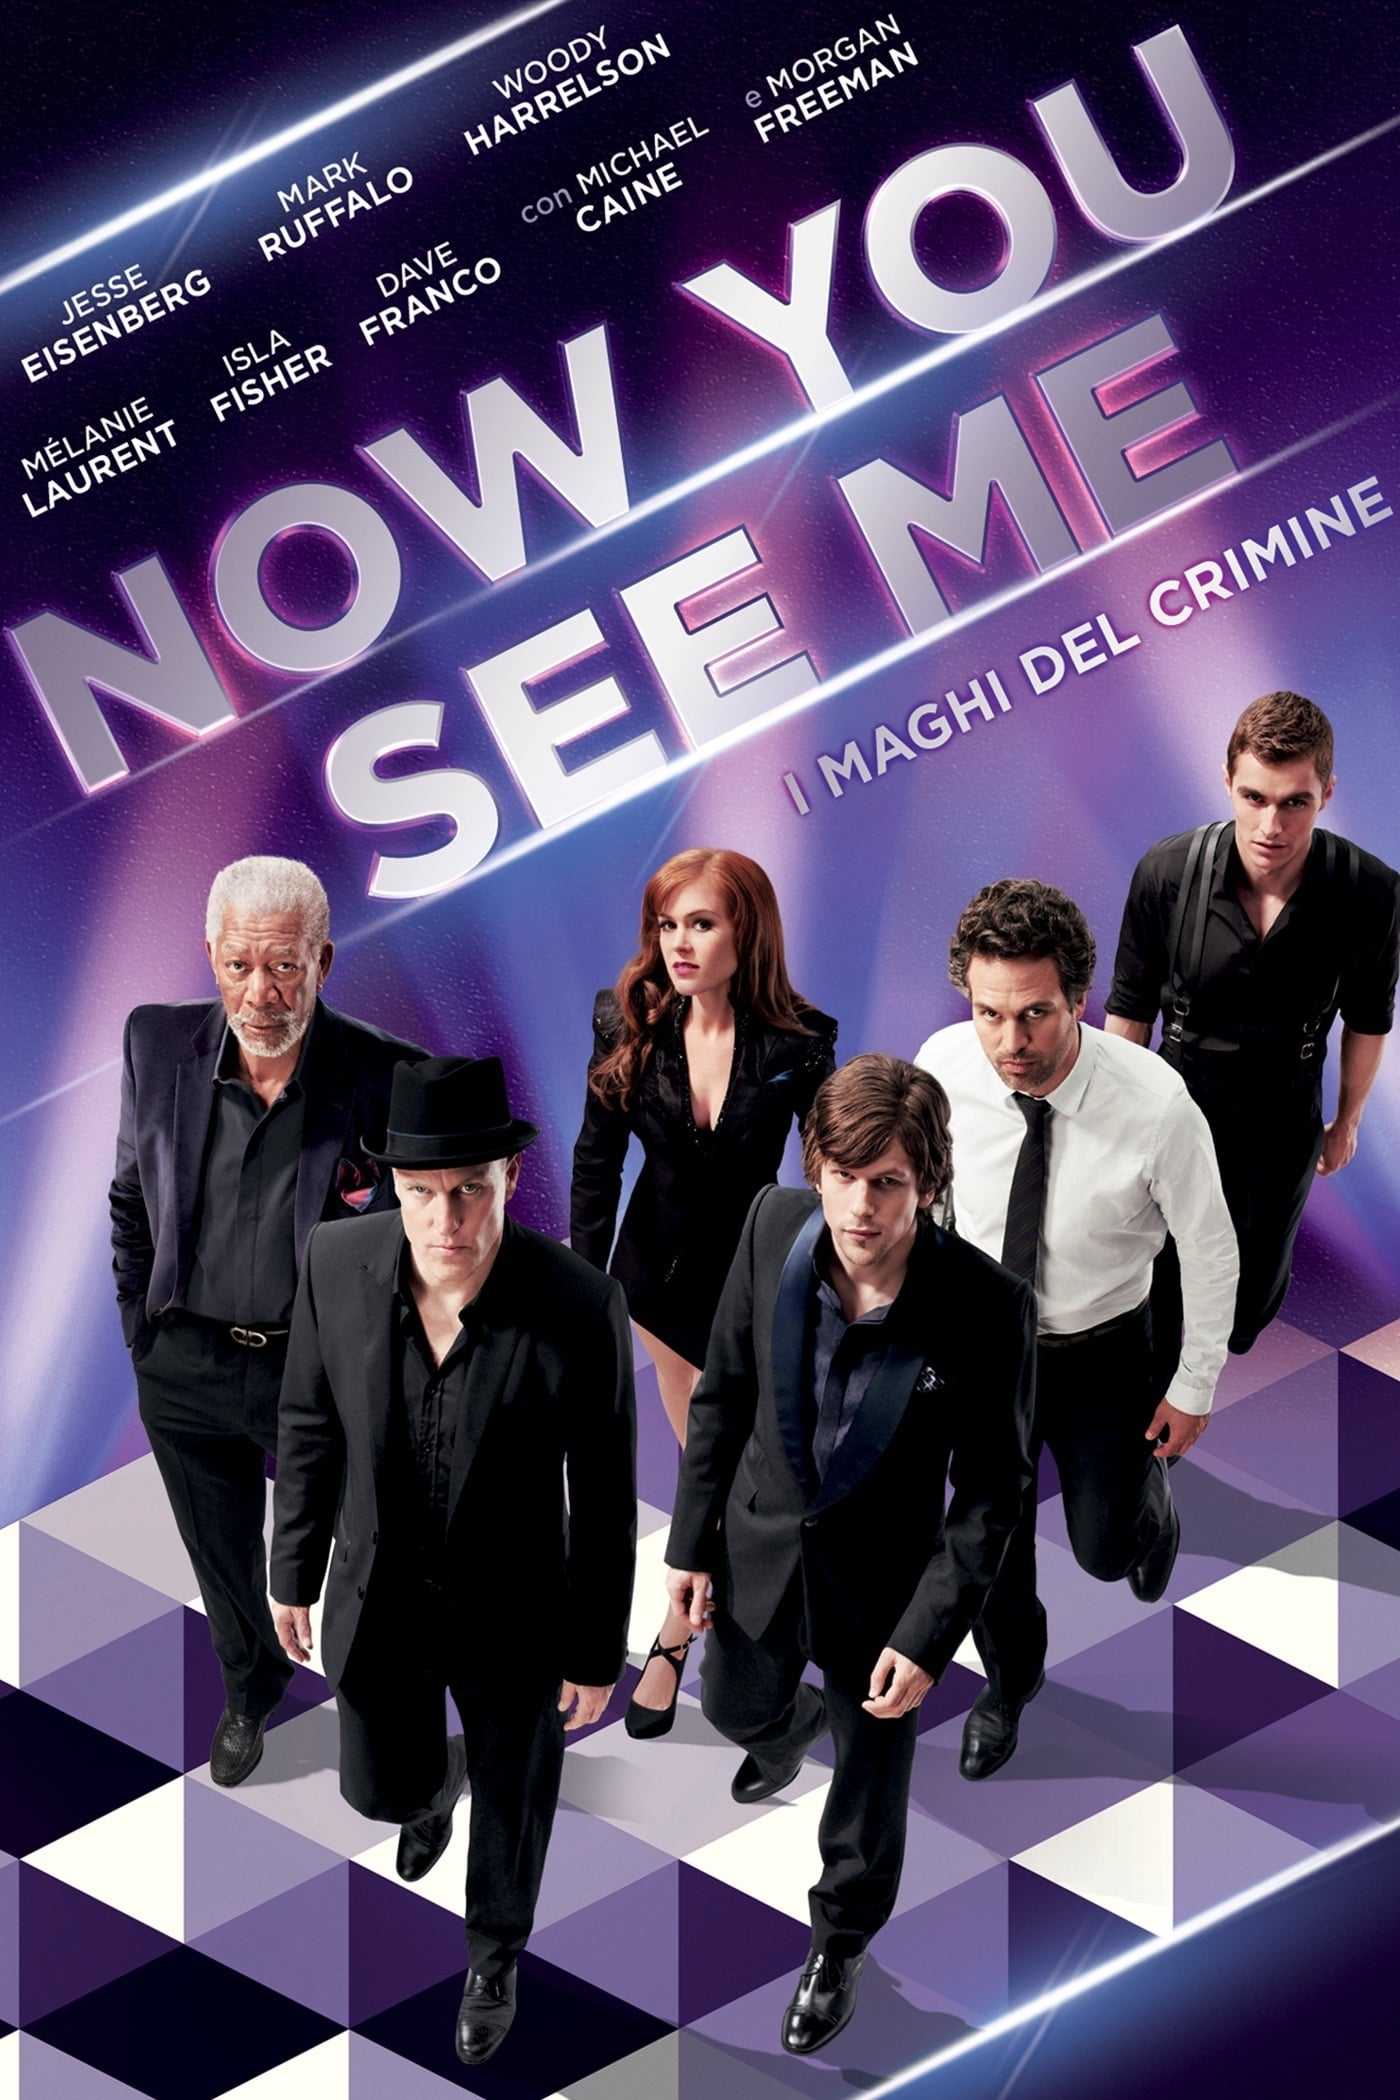 Now You See Me - I maghi del crimine in streaming